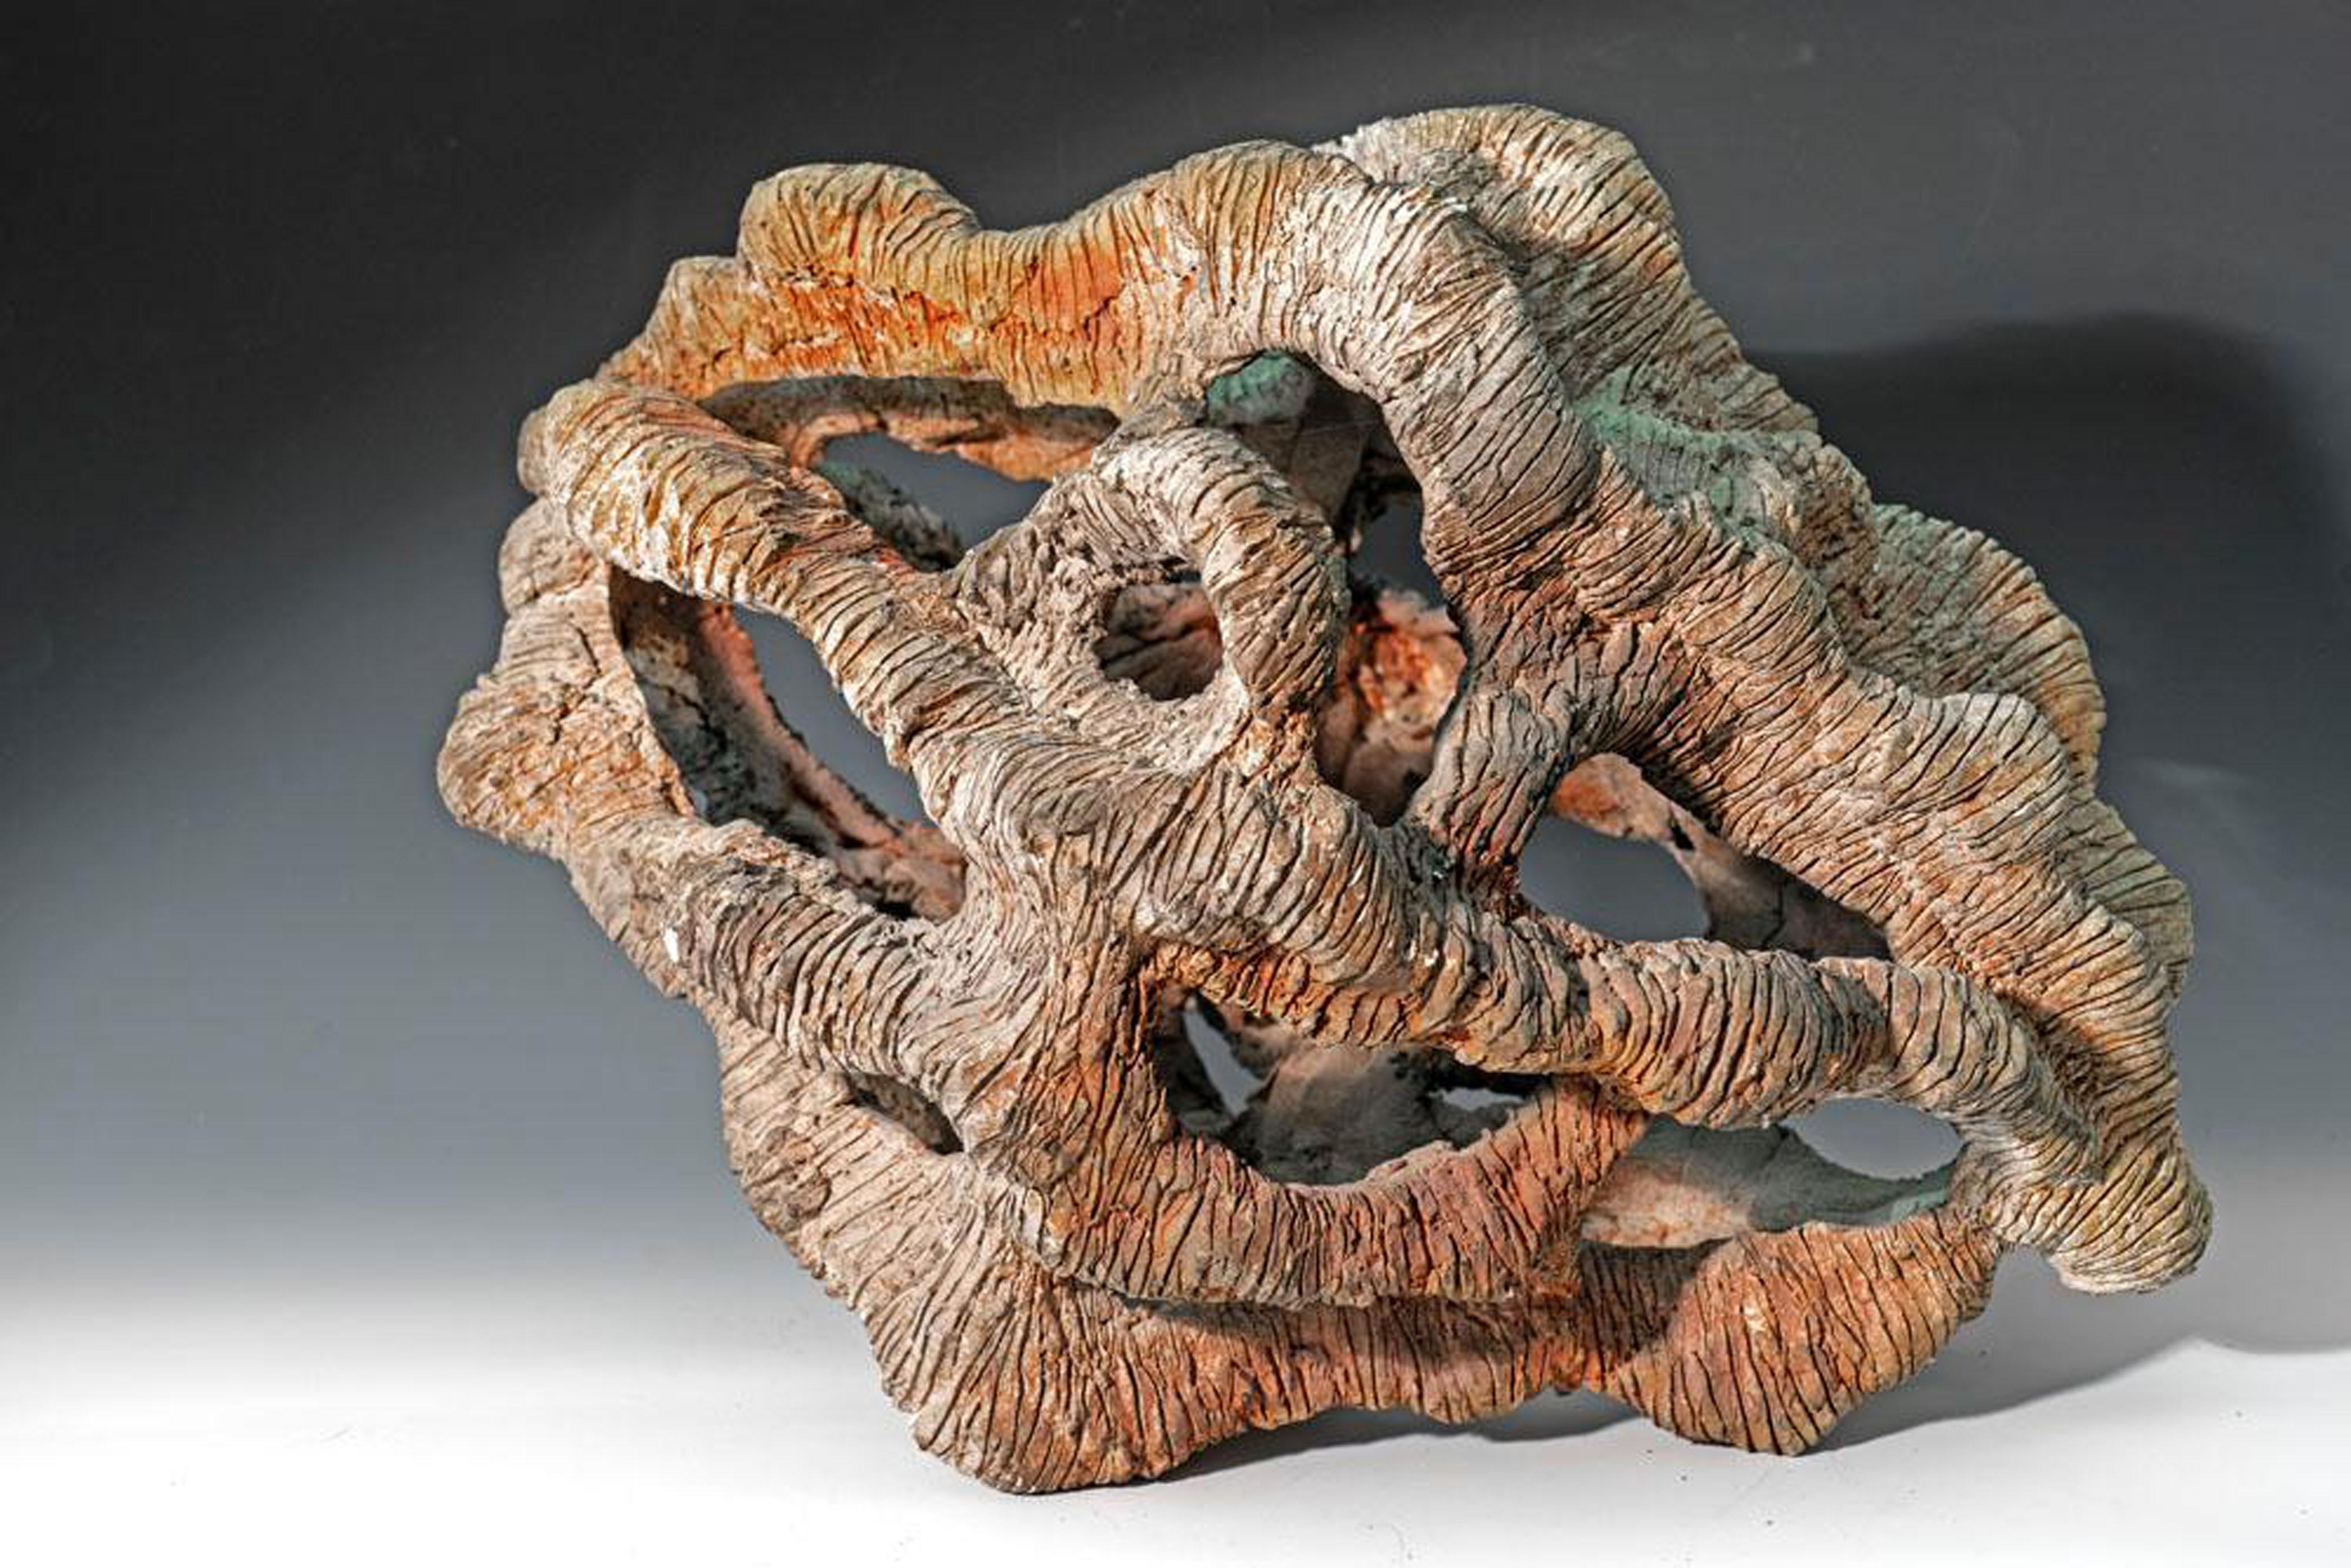 Allan Drossman Abstract Sculpture - "Erosion", textured ceramic in browns and cream, embodies essential clay